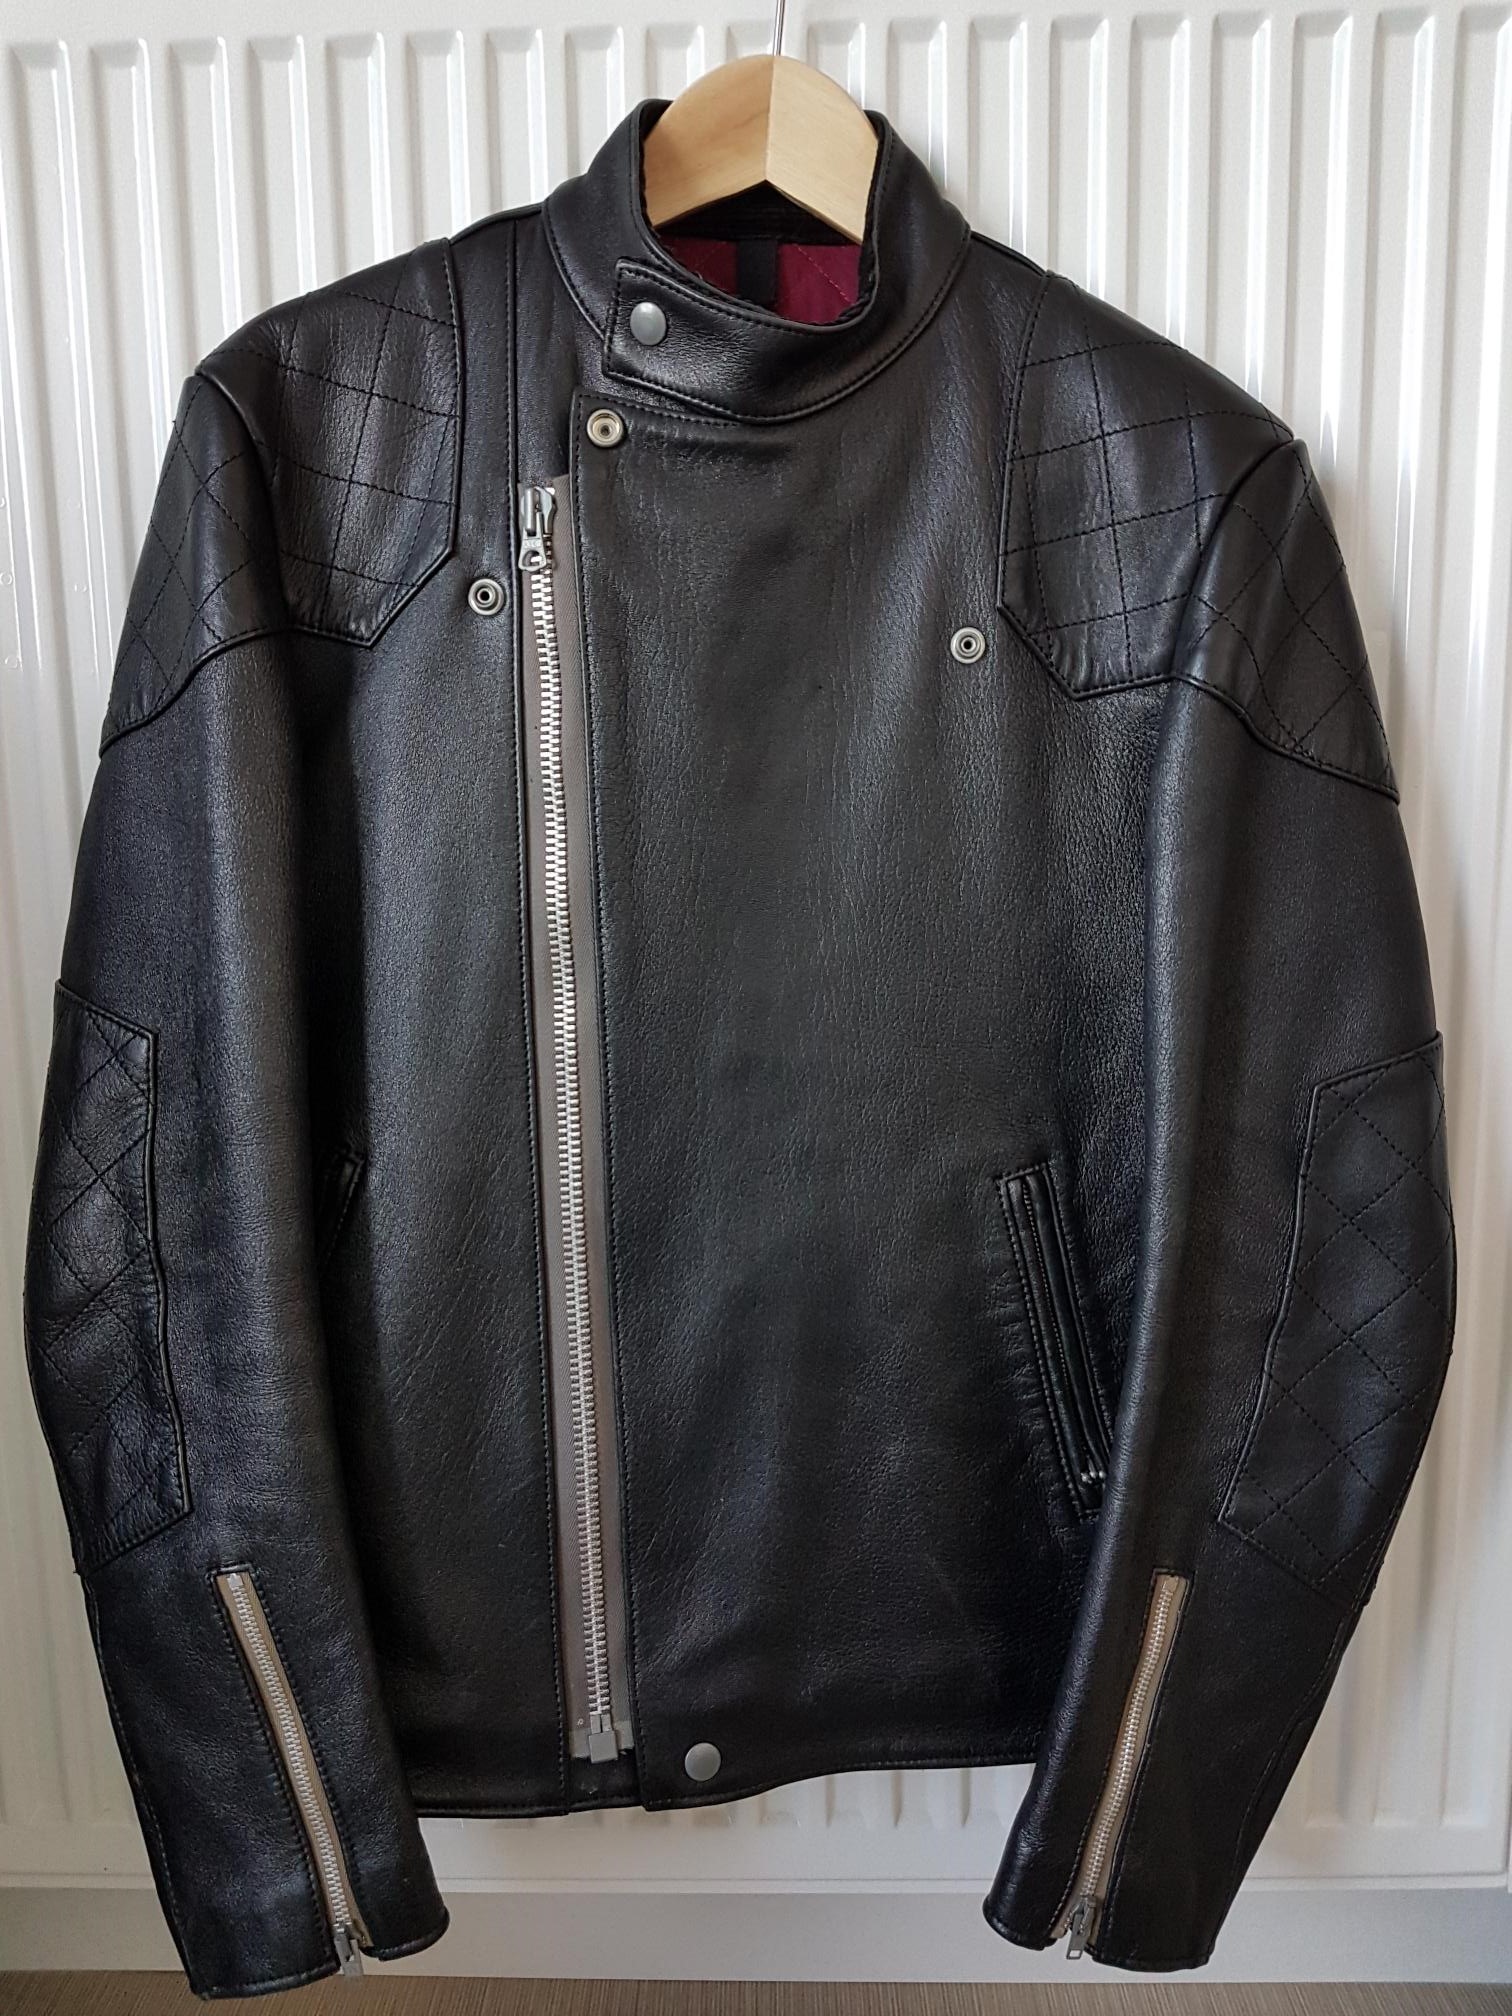 For Sale: Addict Clothes AD-04 Resistance jacket size 38 | The Fedora ...